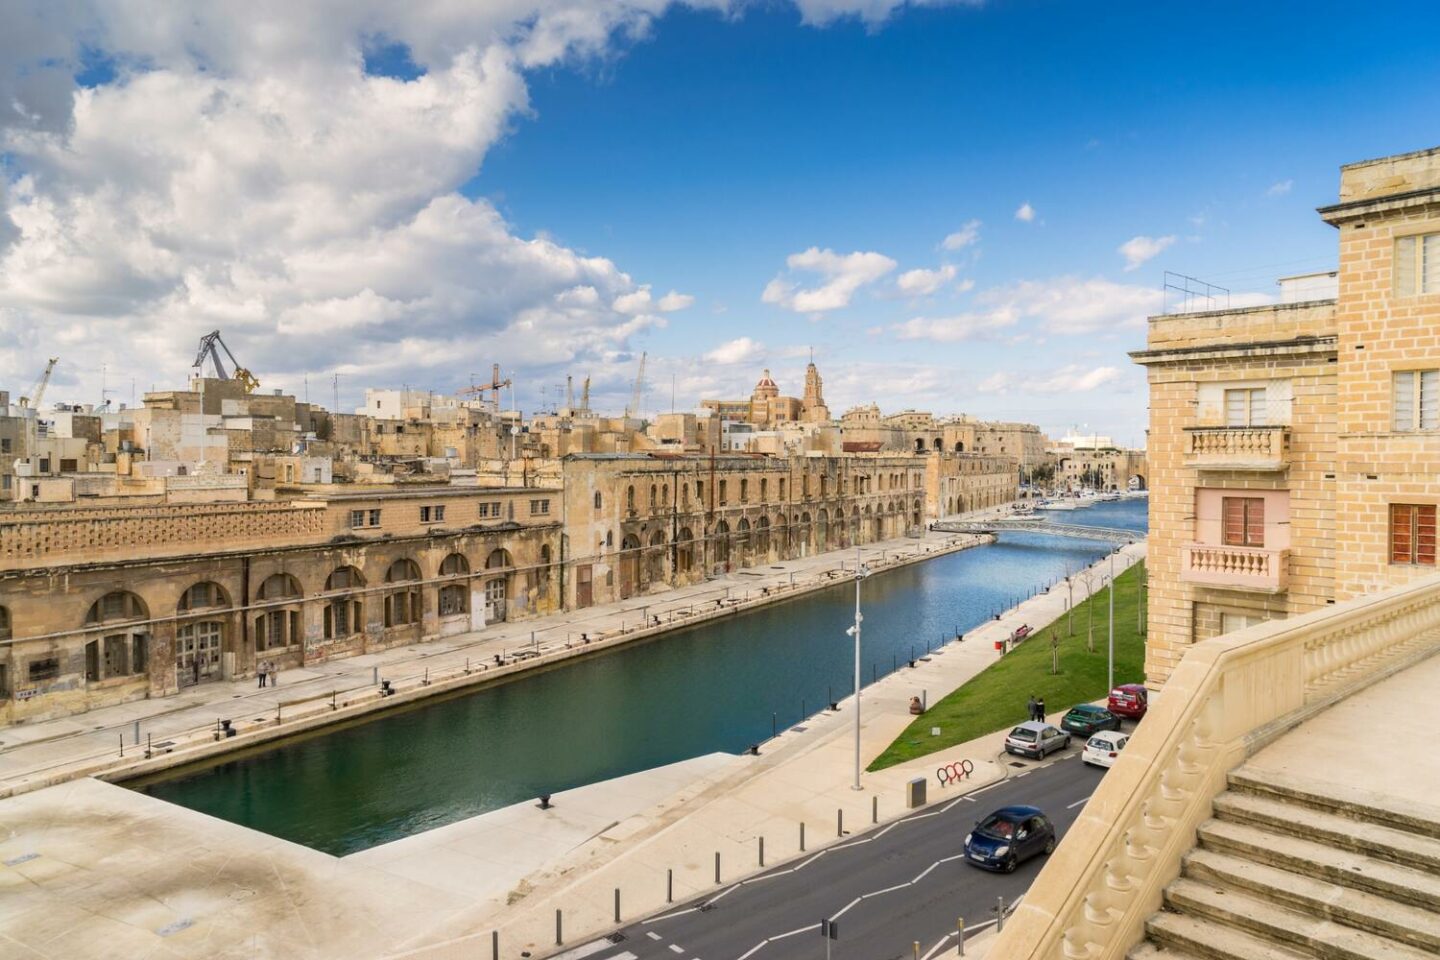 Itinerary for Malta, What to see in Malta in 7 days, 7 days in Malta, 7 day Malta itinerary, 7 day itinerary Malta, 7 days Malta, Malta itinerary, Malta itinerary 7 days, How many days in Malta, Malta trip itinerary, 1 week itinerary Malta, A week in Malta, 1 week in Malta, One week in Malta, One week Malta, Itinerary for Malta 7 days